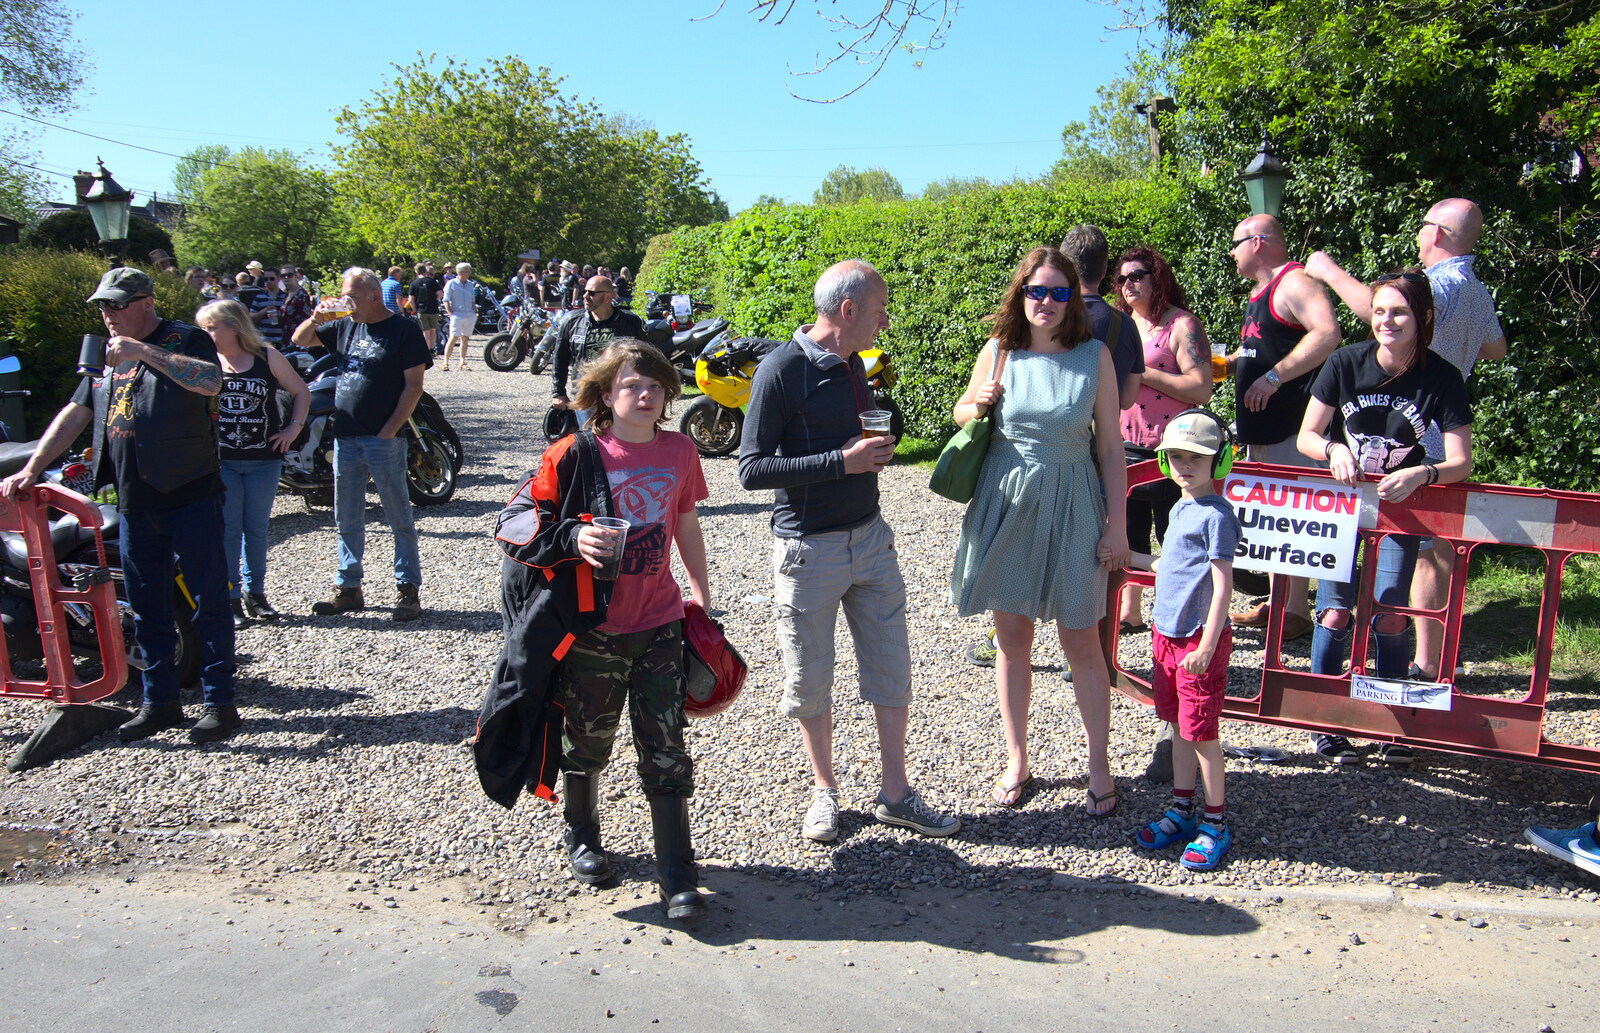 DH, Isobel and Harry are in the crowd from Beer, Bikes and Bands, Burston Crown, Burston, Norfolk - 6th May 2018